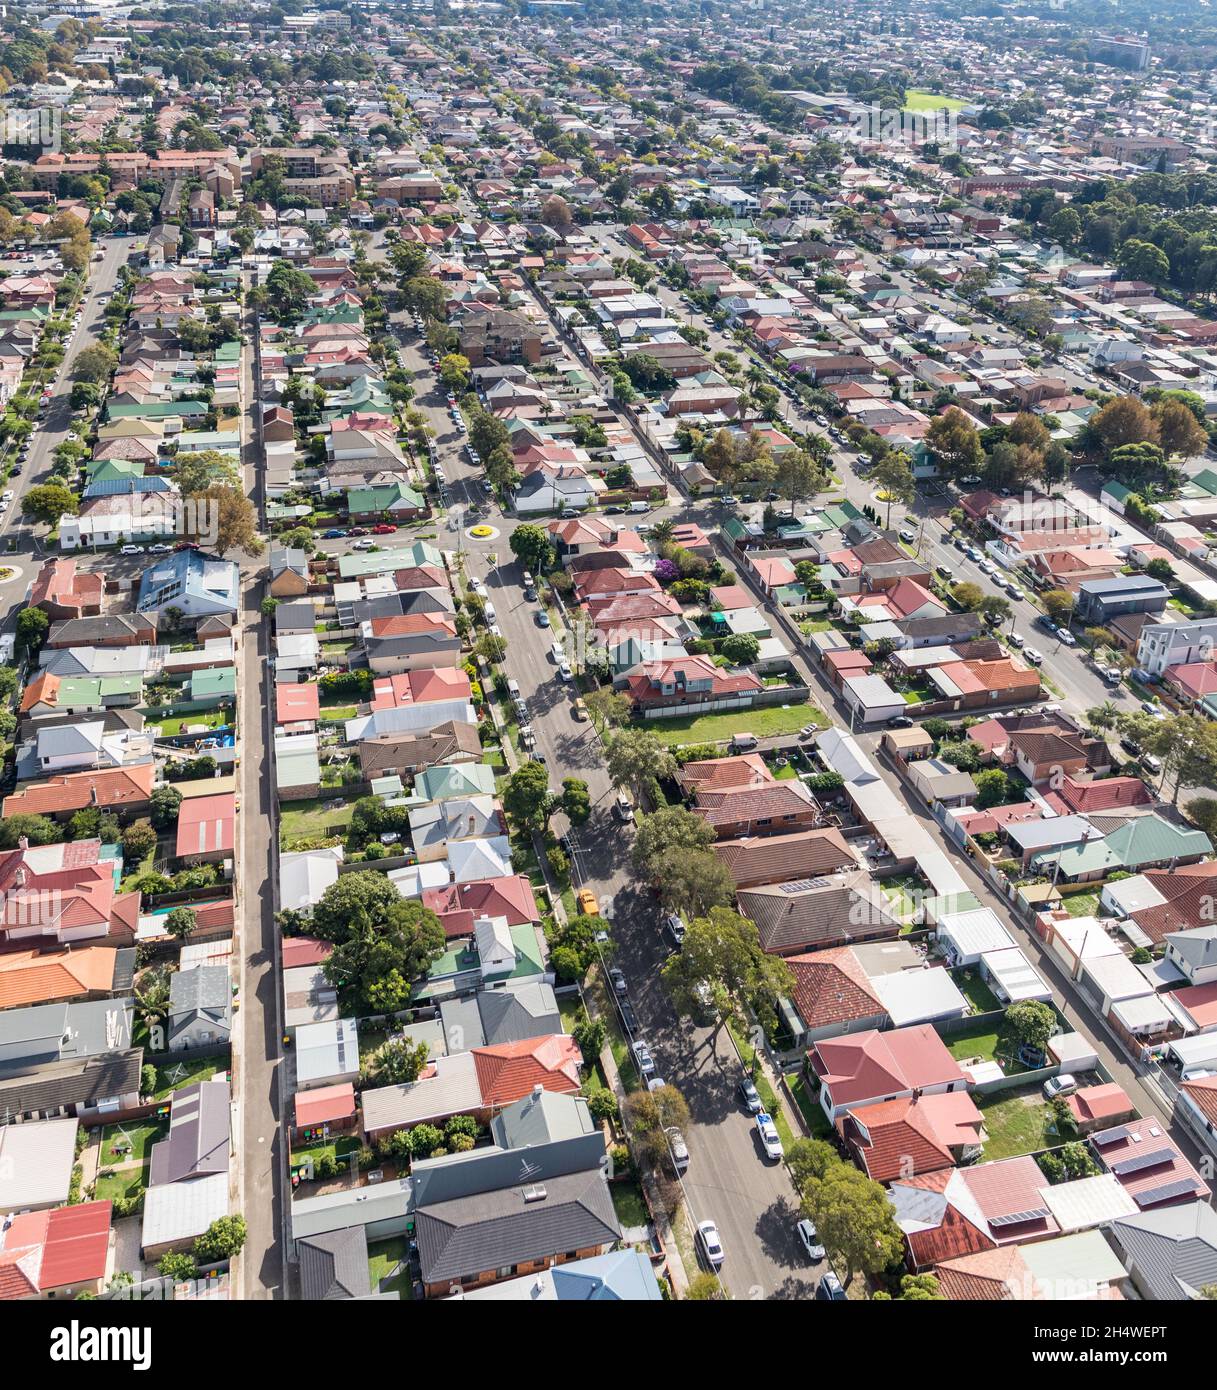 Aerial view of residential area in Sydney's Eastern Suburbs - Sydney Australia Stock Photo